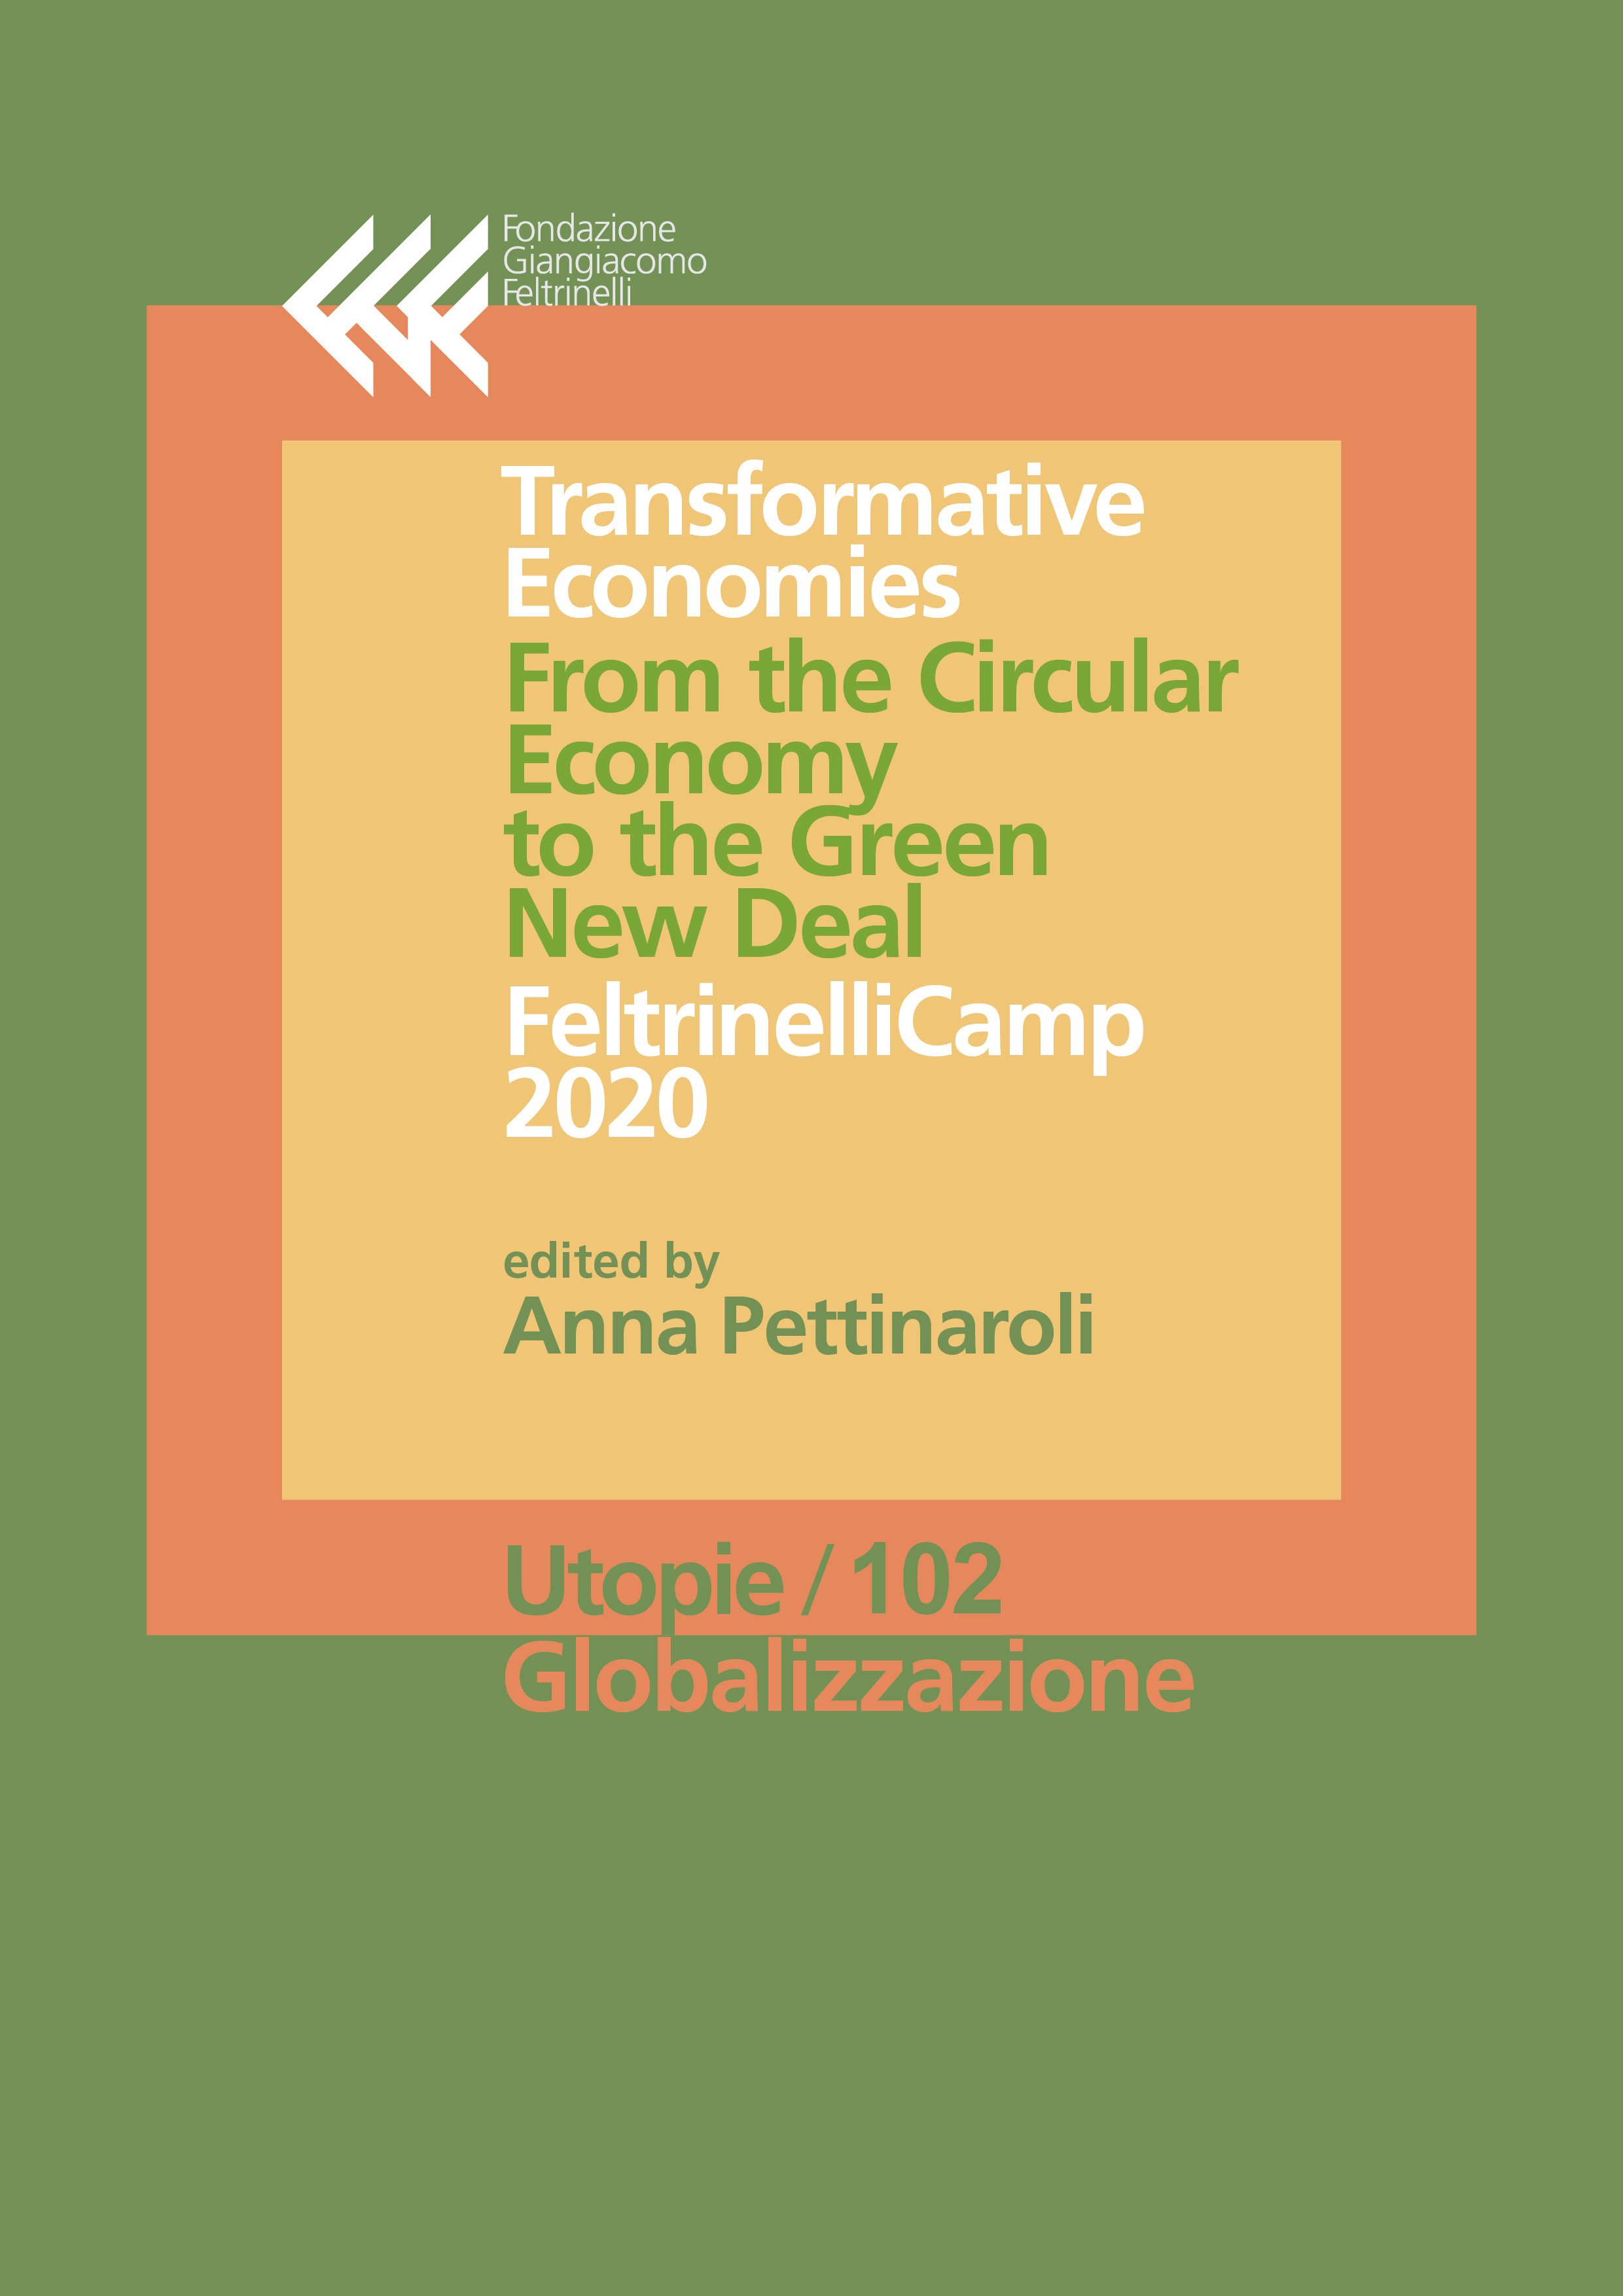 Transformative Economies
From the Circular Economy to the Green New Deal
